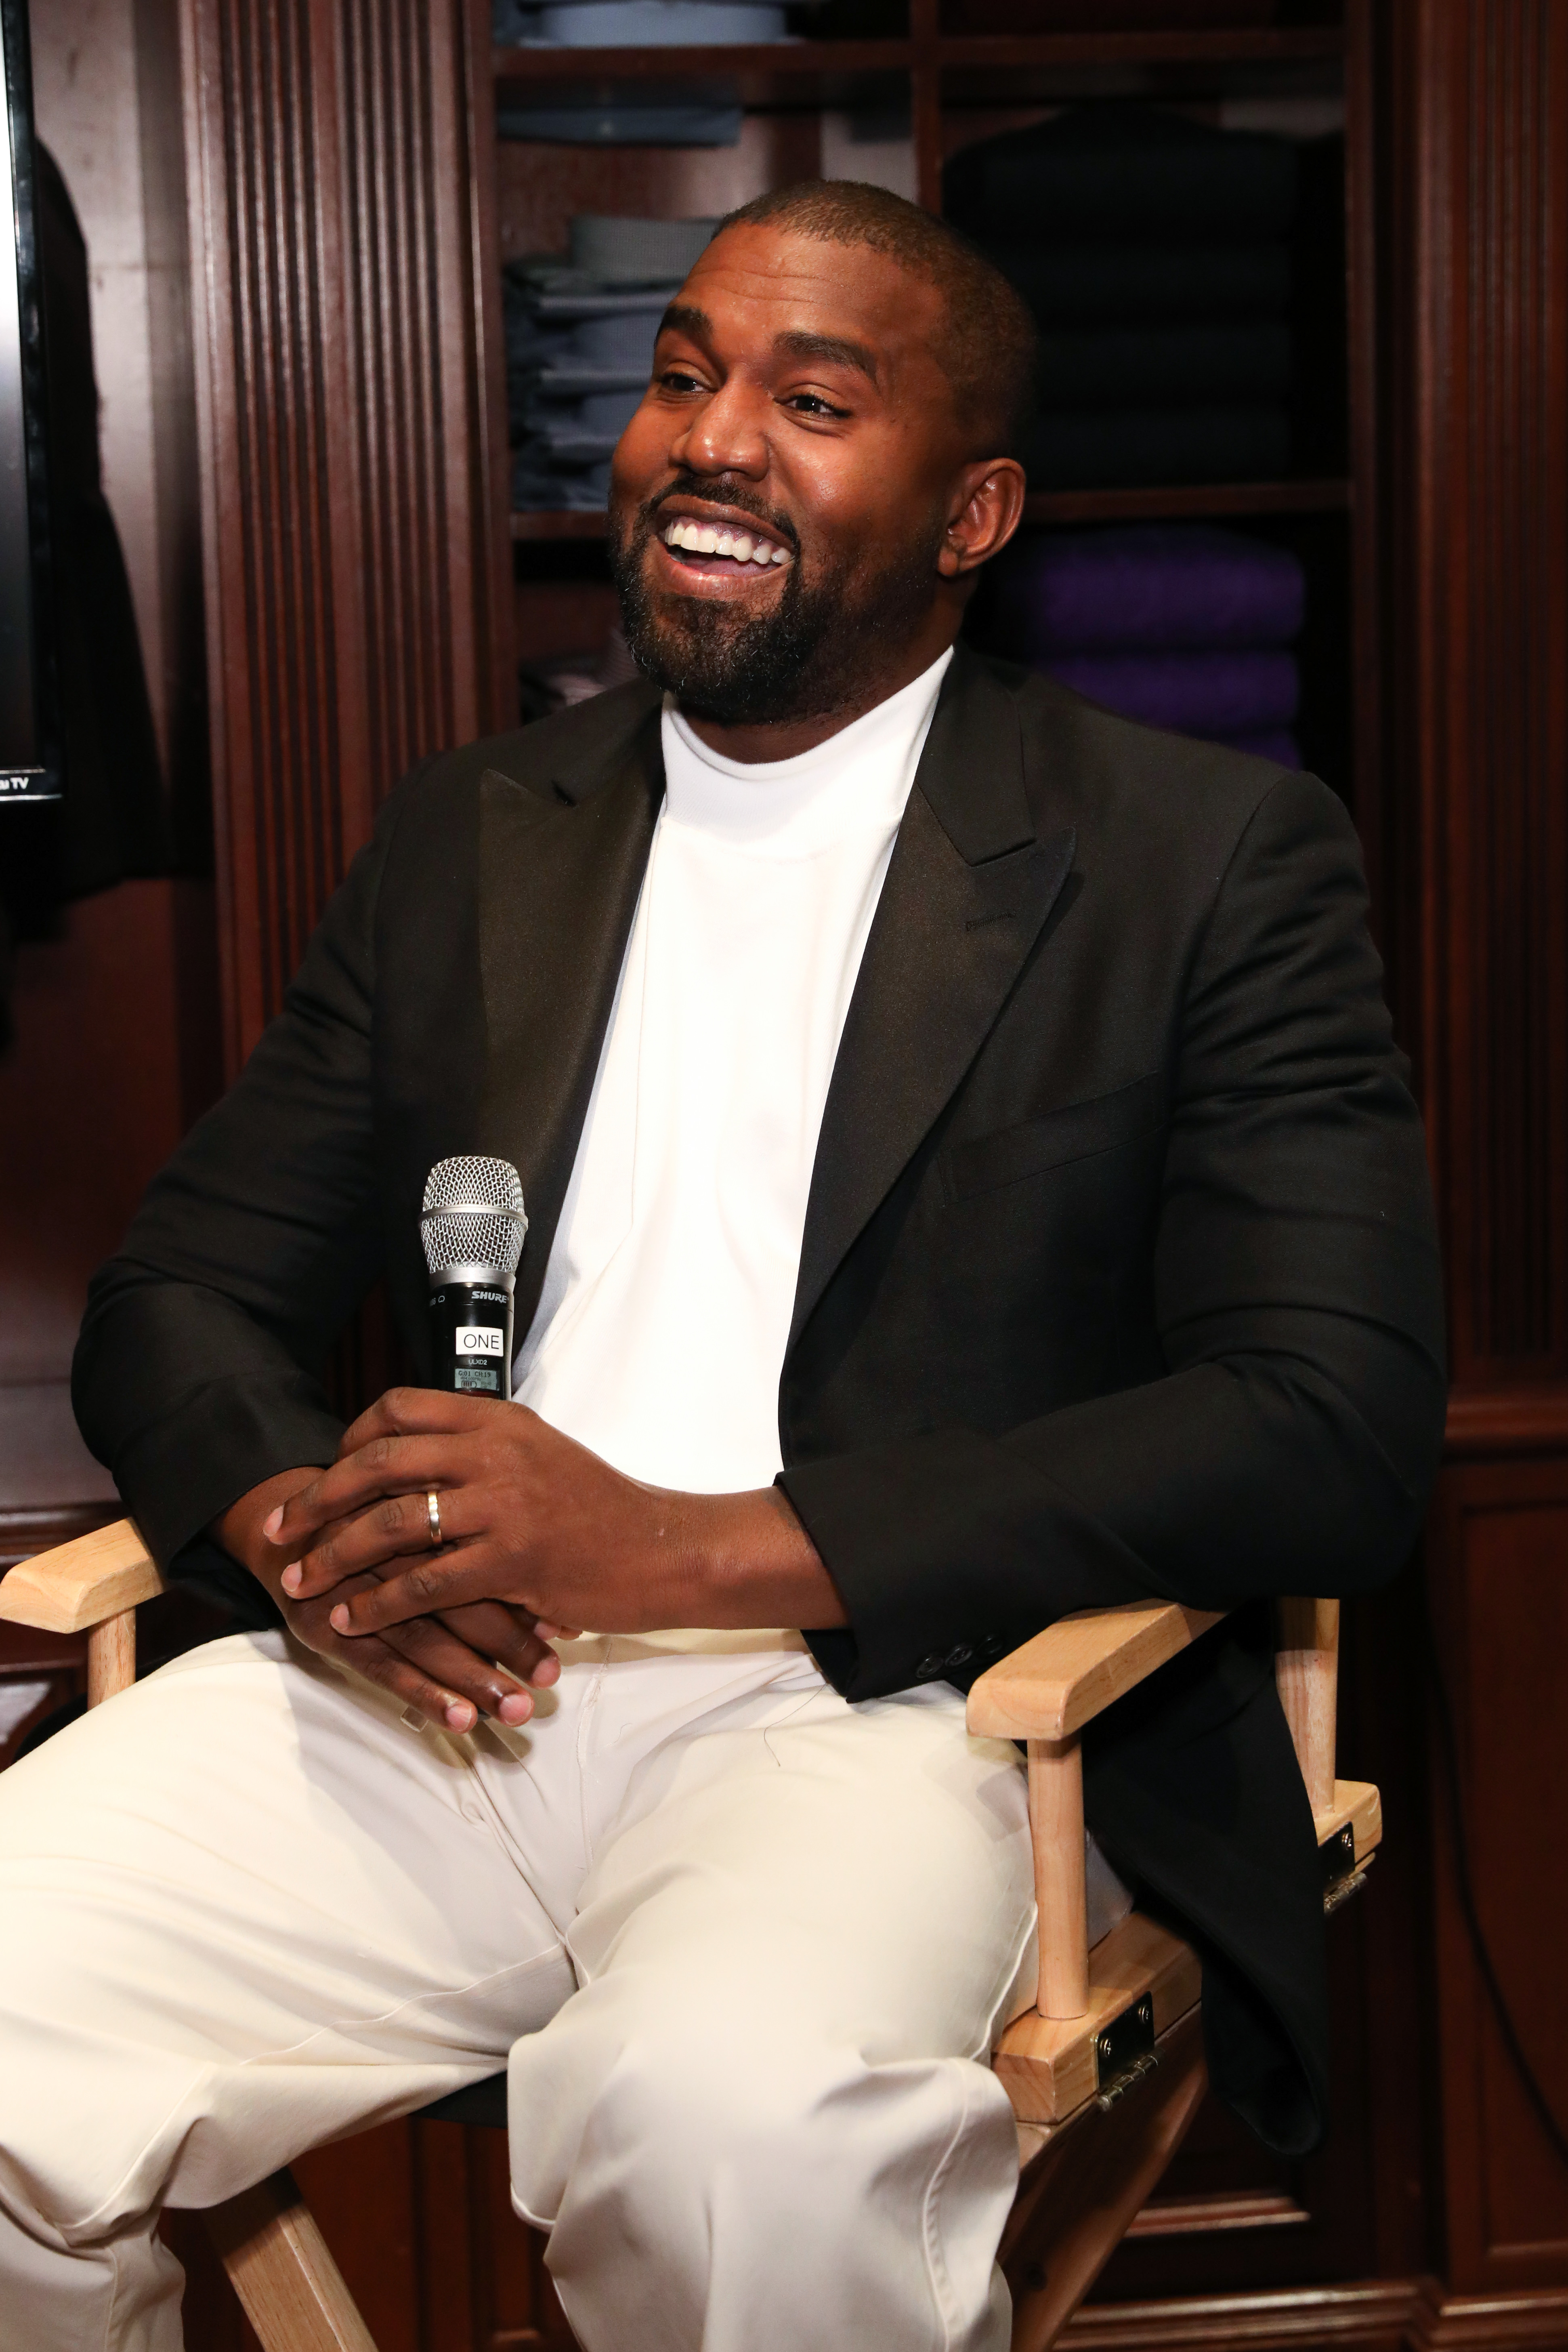 Closeup of Kanye West smiling as he sits and holds a microphone